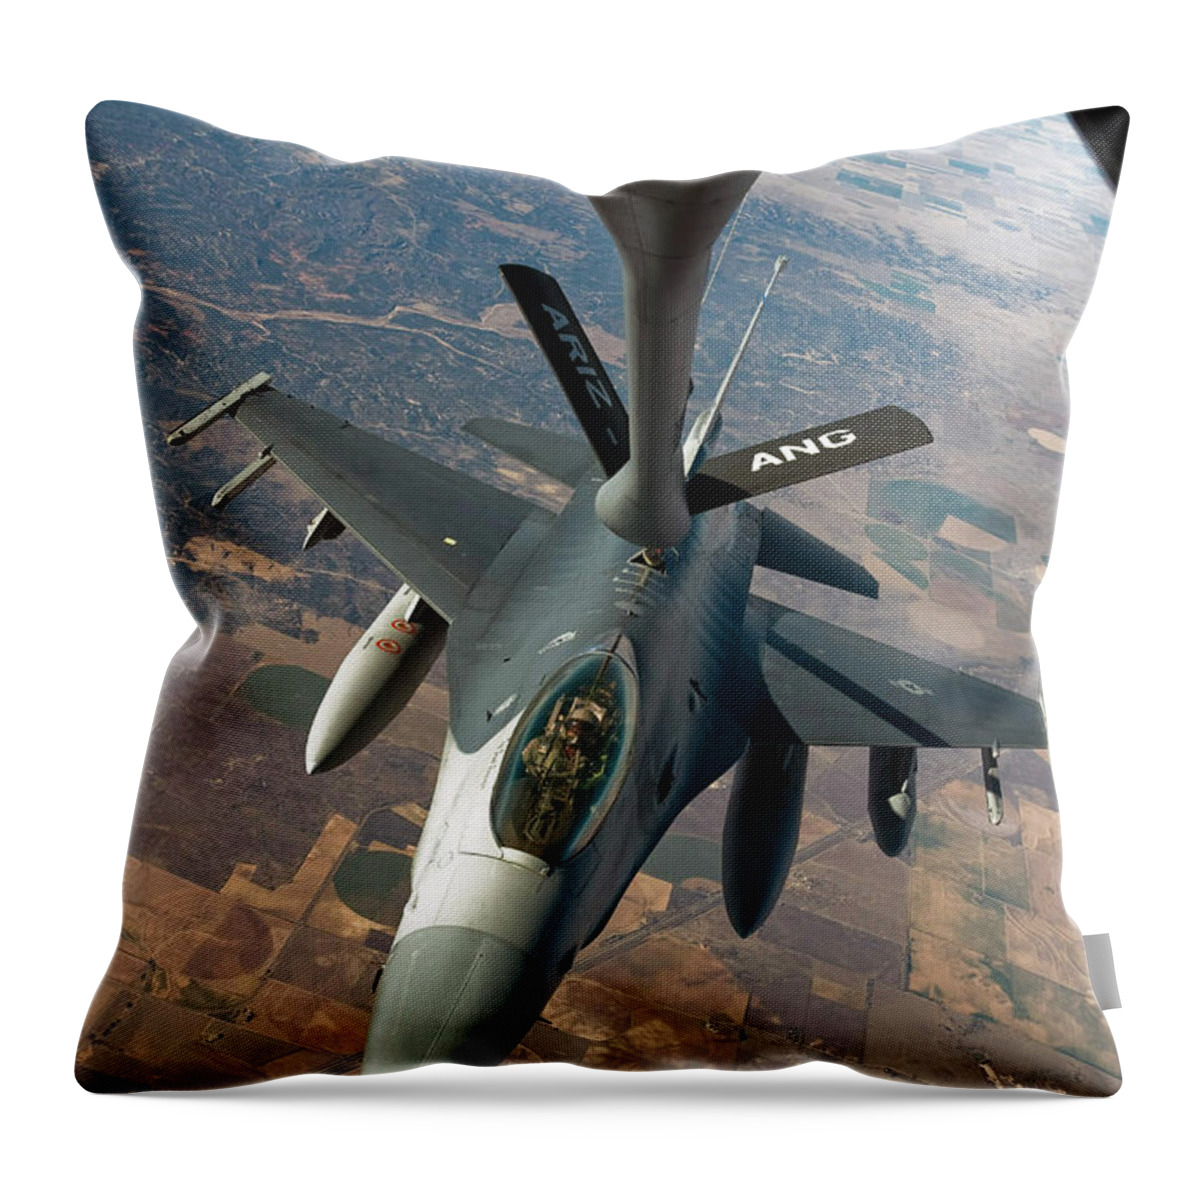 Air-to-air Throw Pillow featuring the photograph An F-16 Fighting Falcon Receiving Fuel by Stocktrek Images